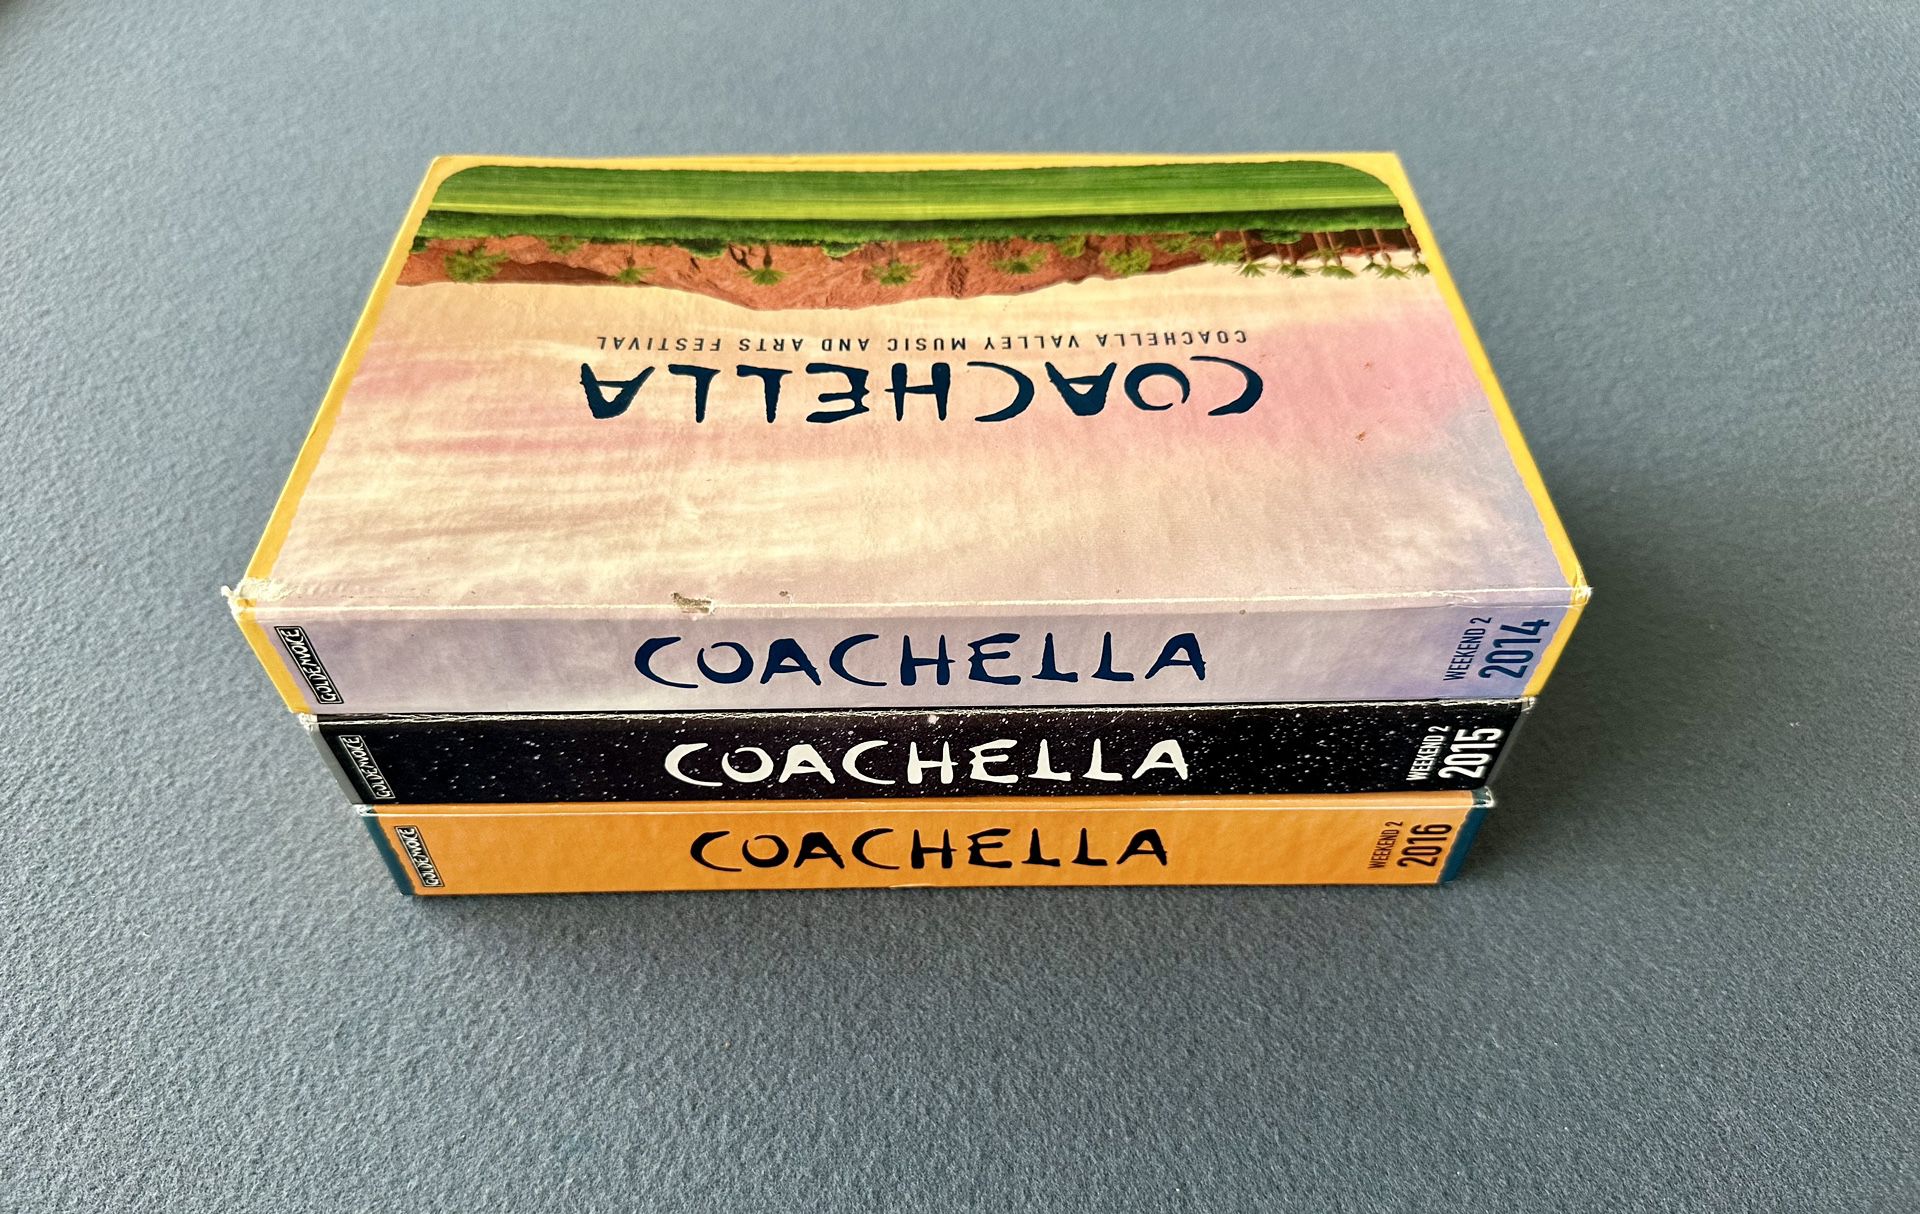 2014 2016 2016 Coachella Collectors Boxes With Welcome Guides